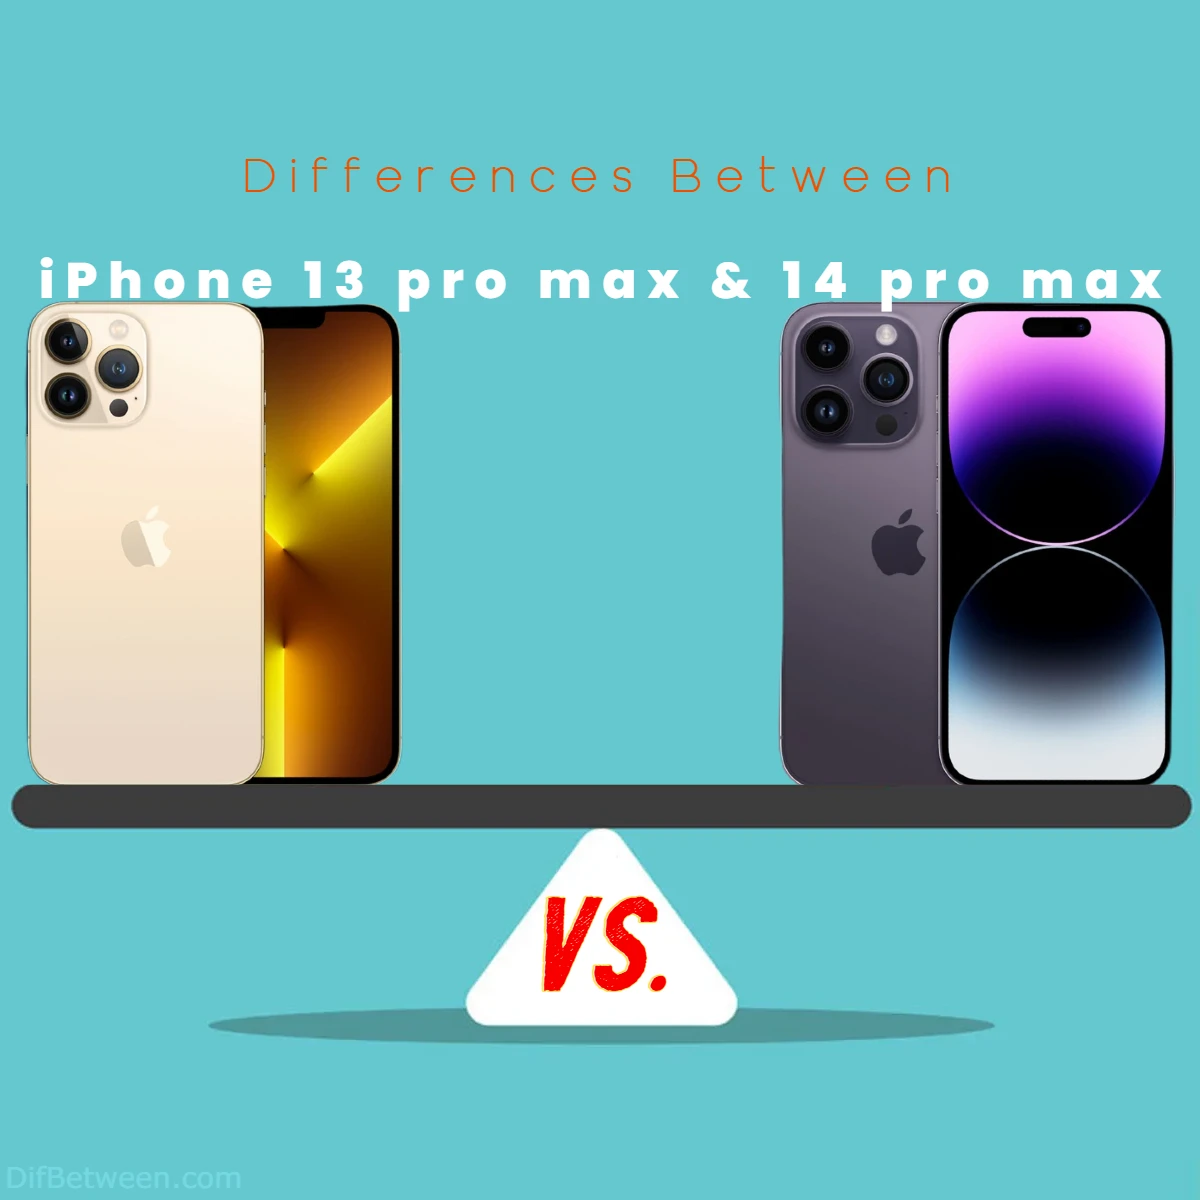 Difference Between iPhone 14 pro max and iPhone 13 pro max